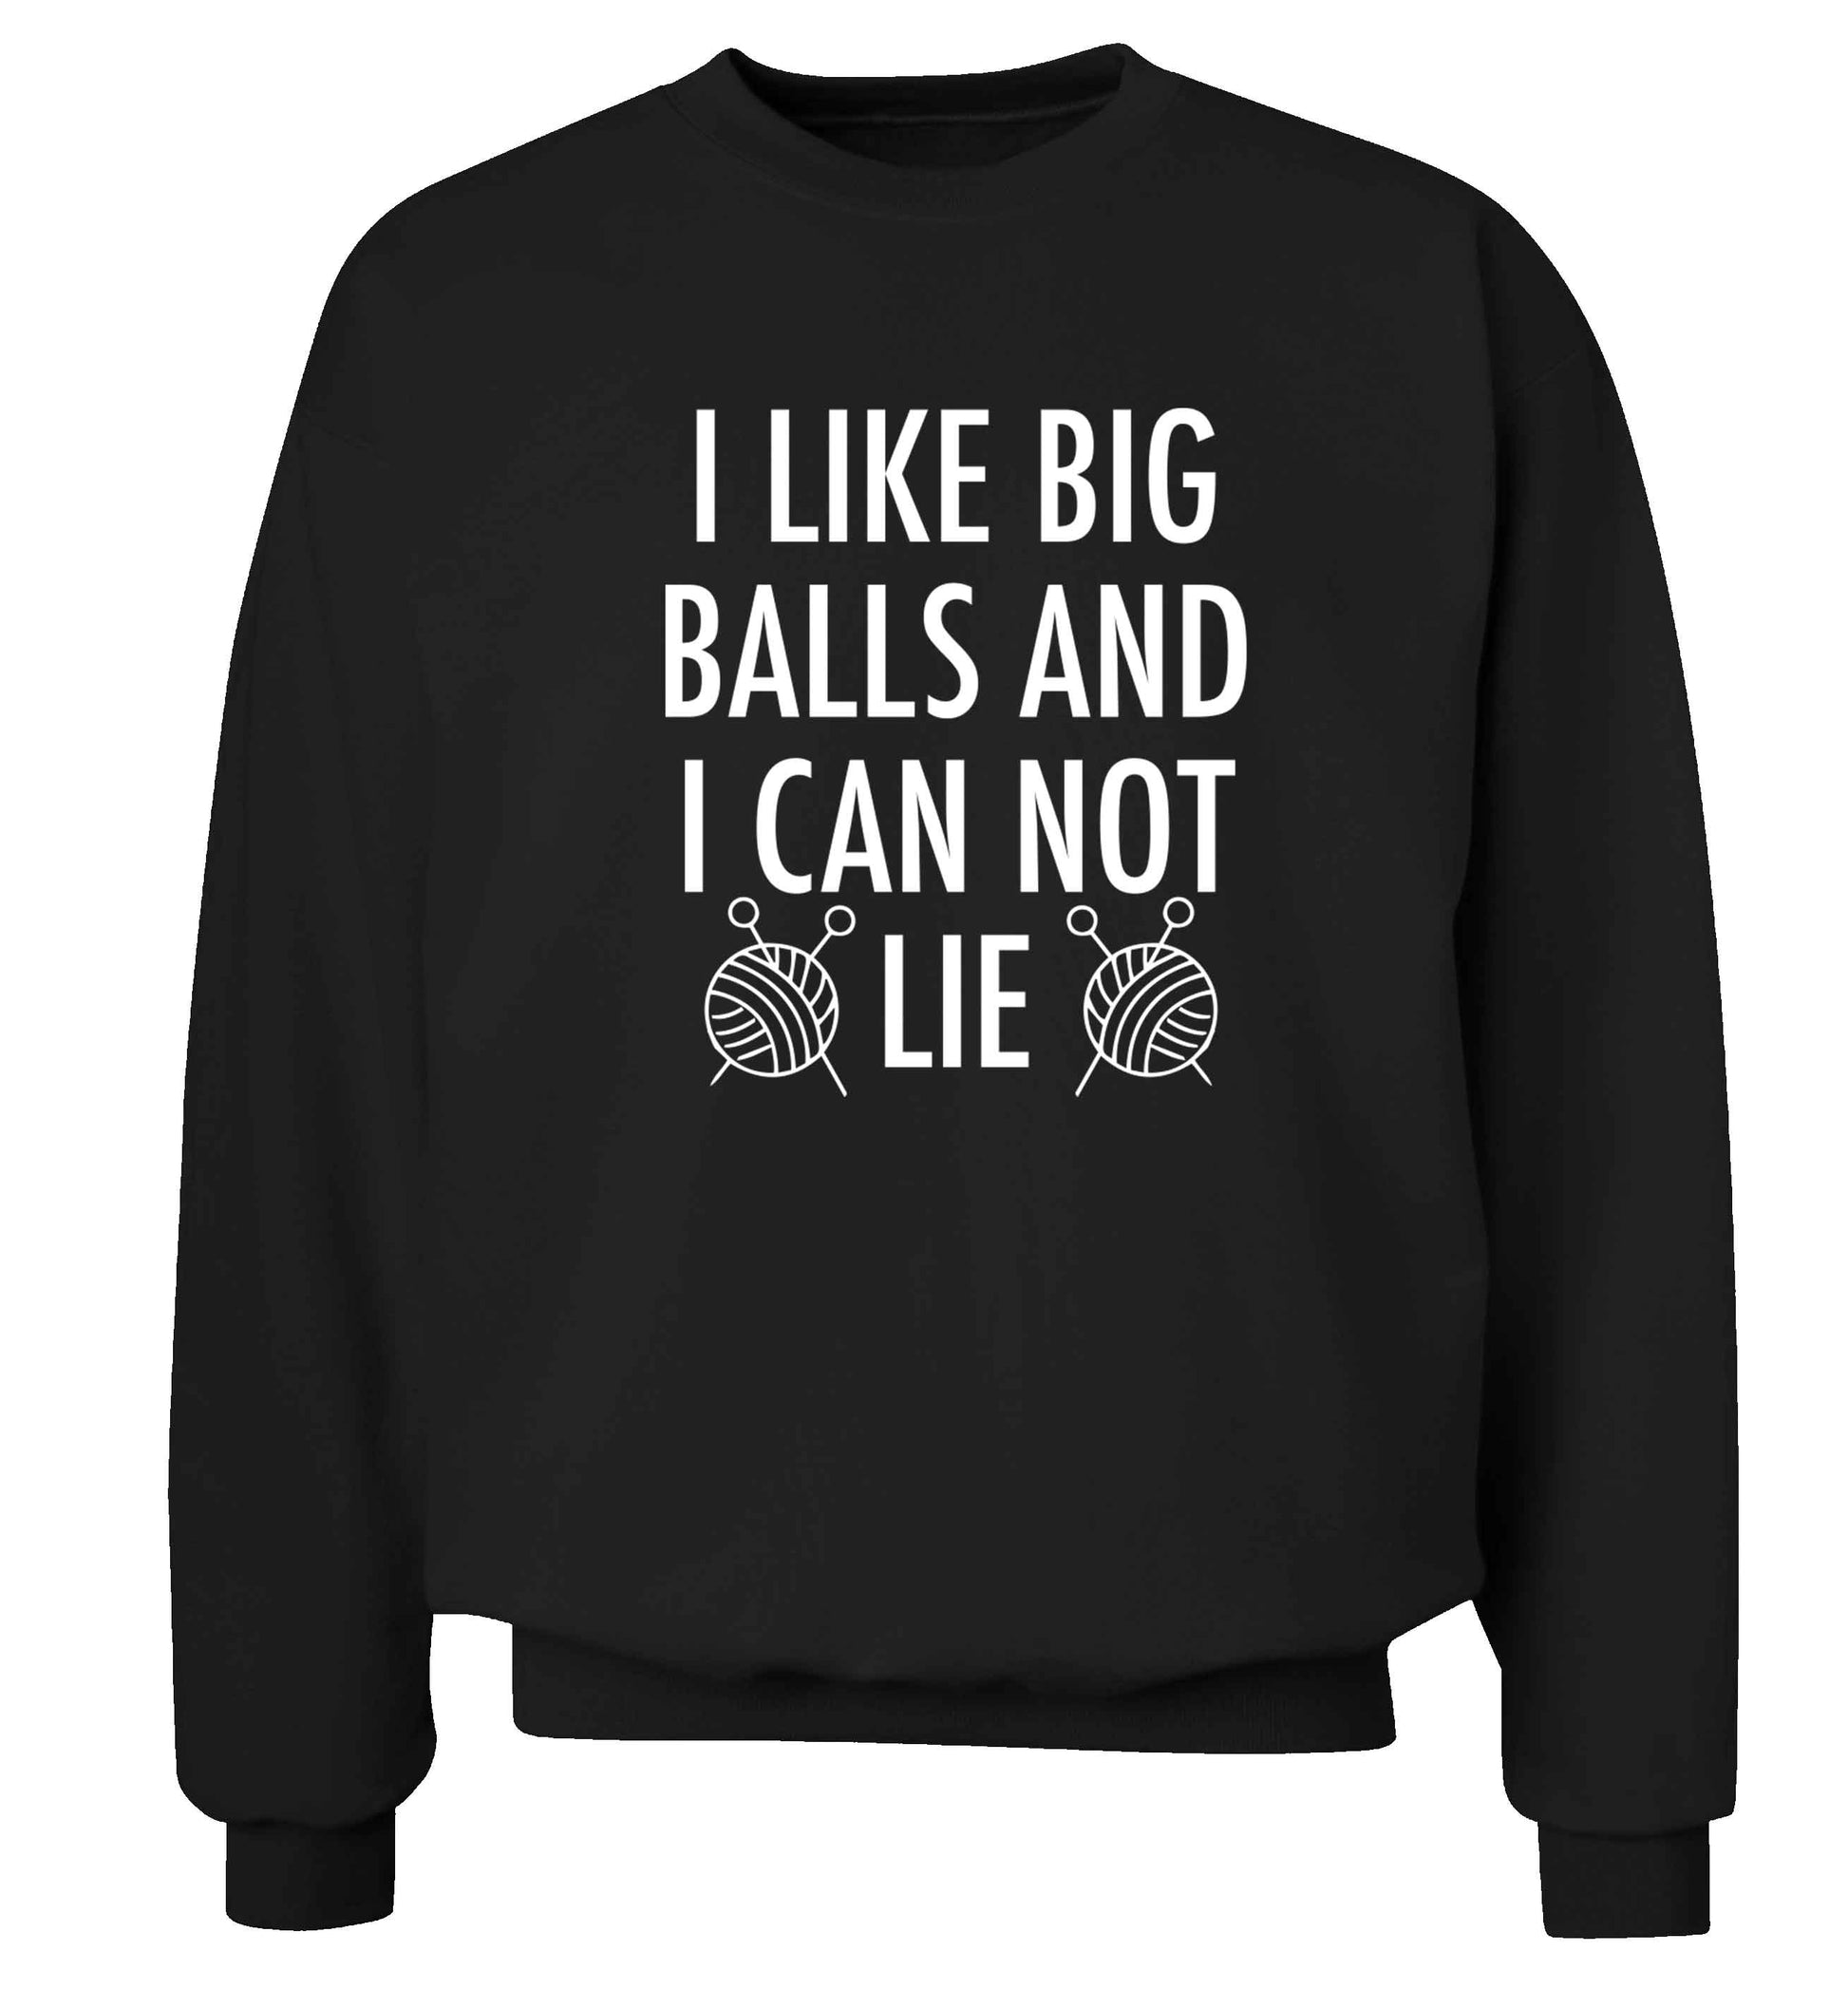 I like big balls and I can not lie Adult's unisex black Sweater 2XL